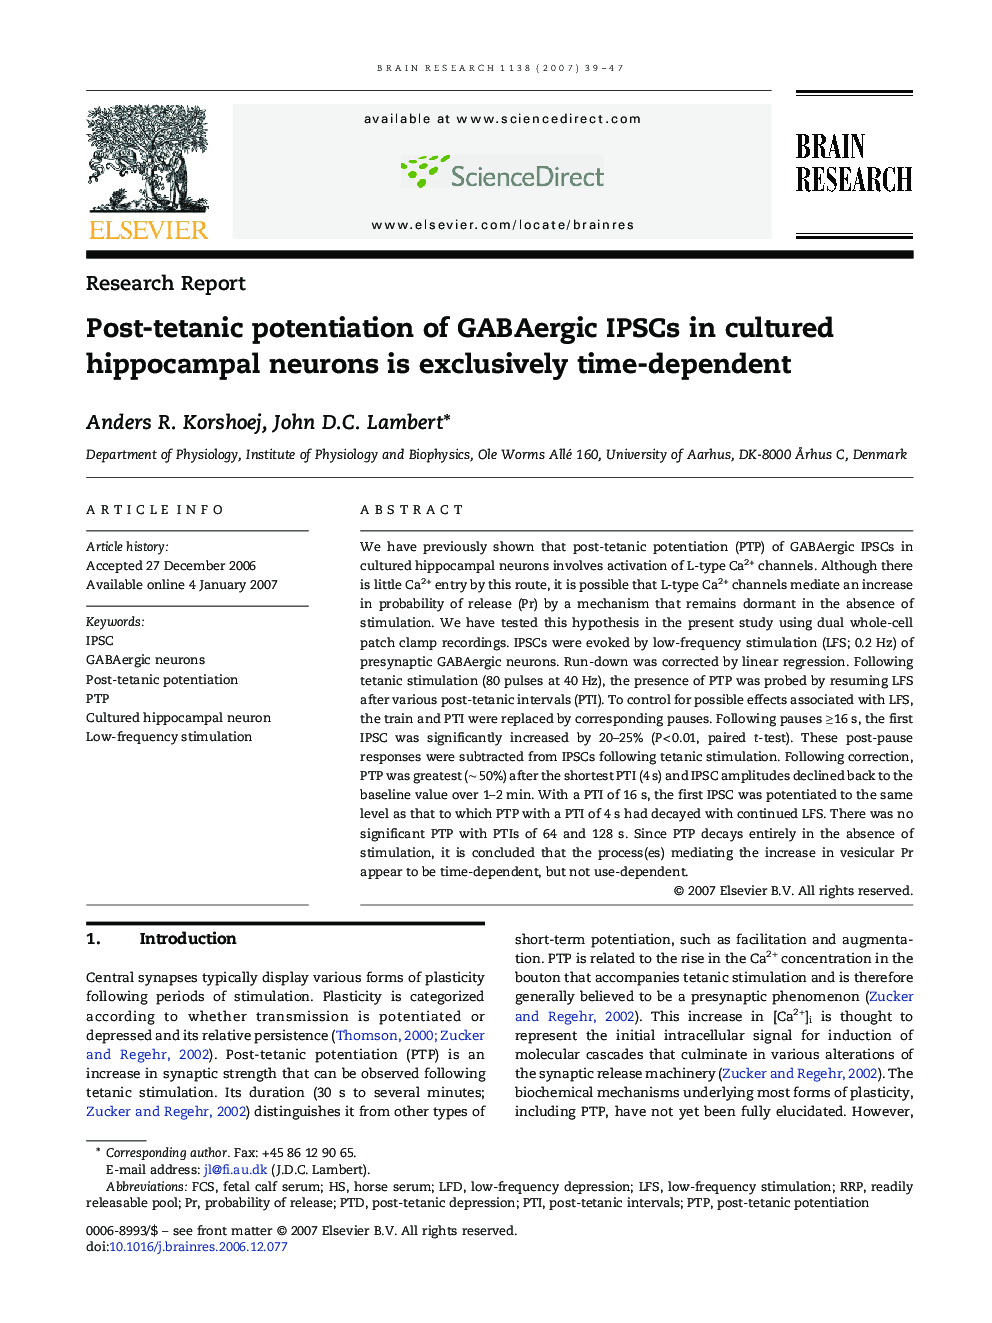 Post-tetanic potentiation of GABAergic IPSCs in cultured hippocampal neurons is exclusively time-dependent